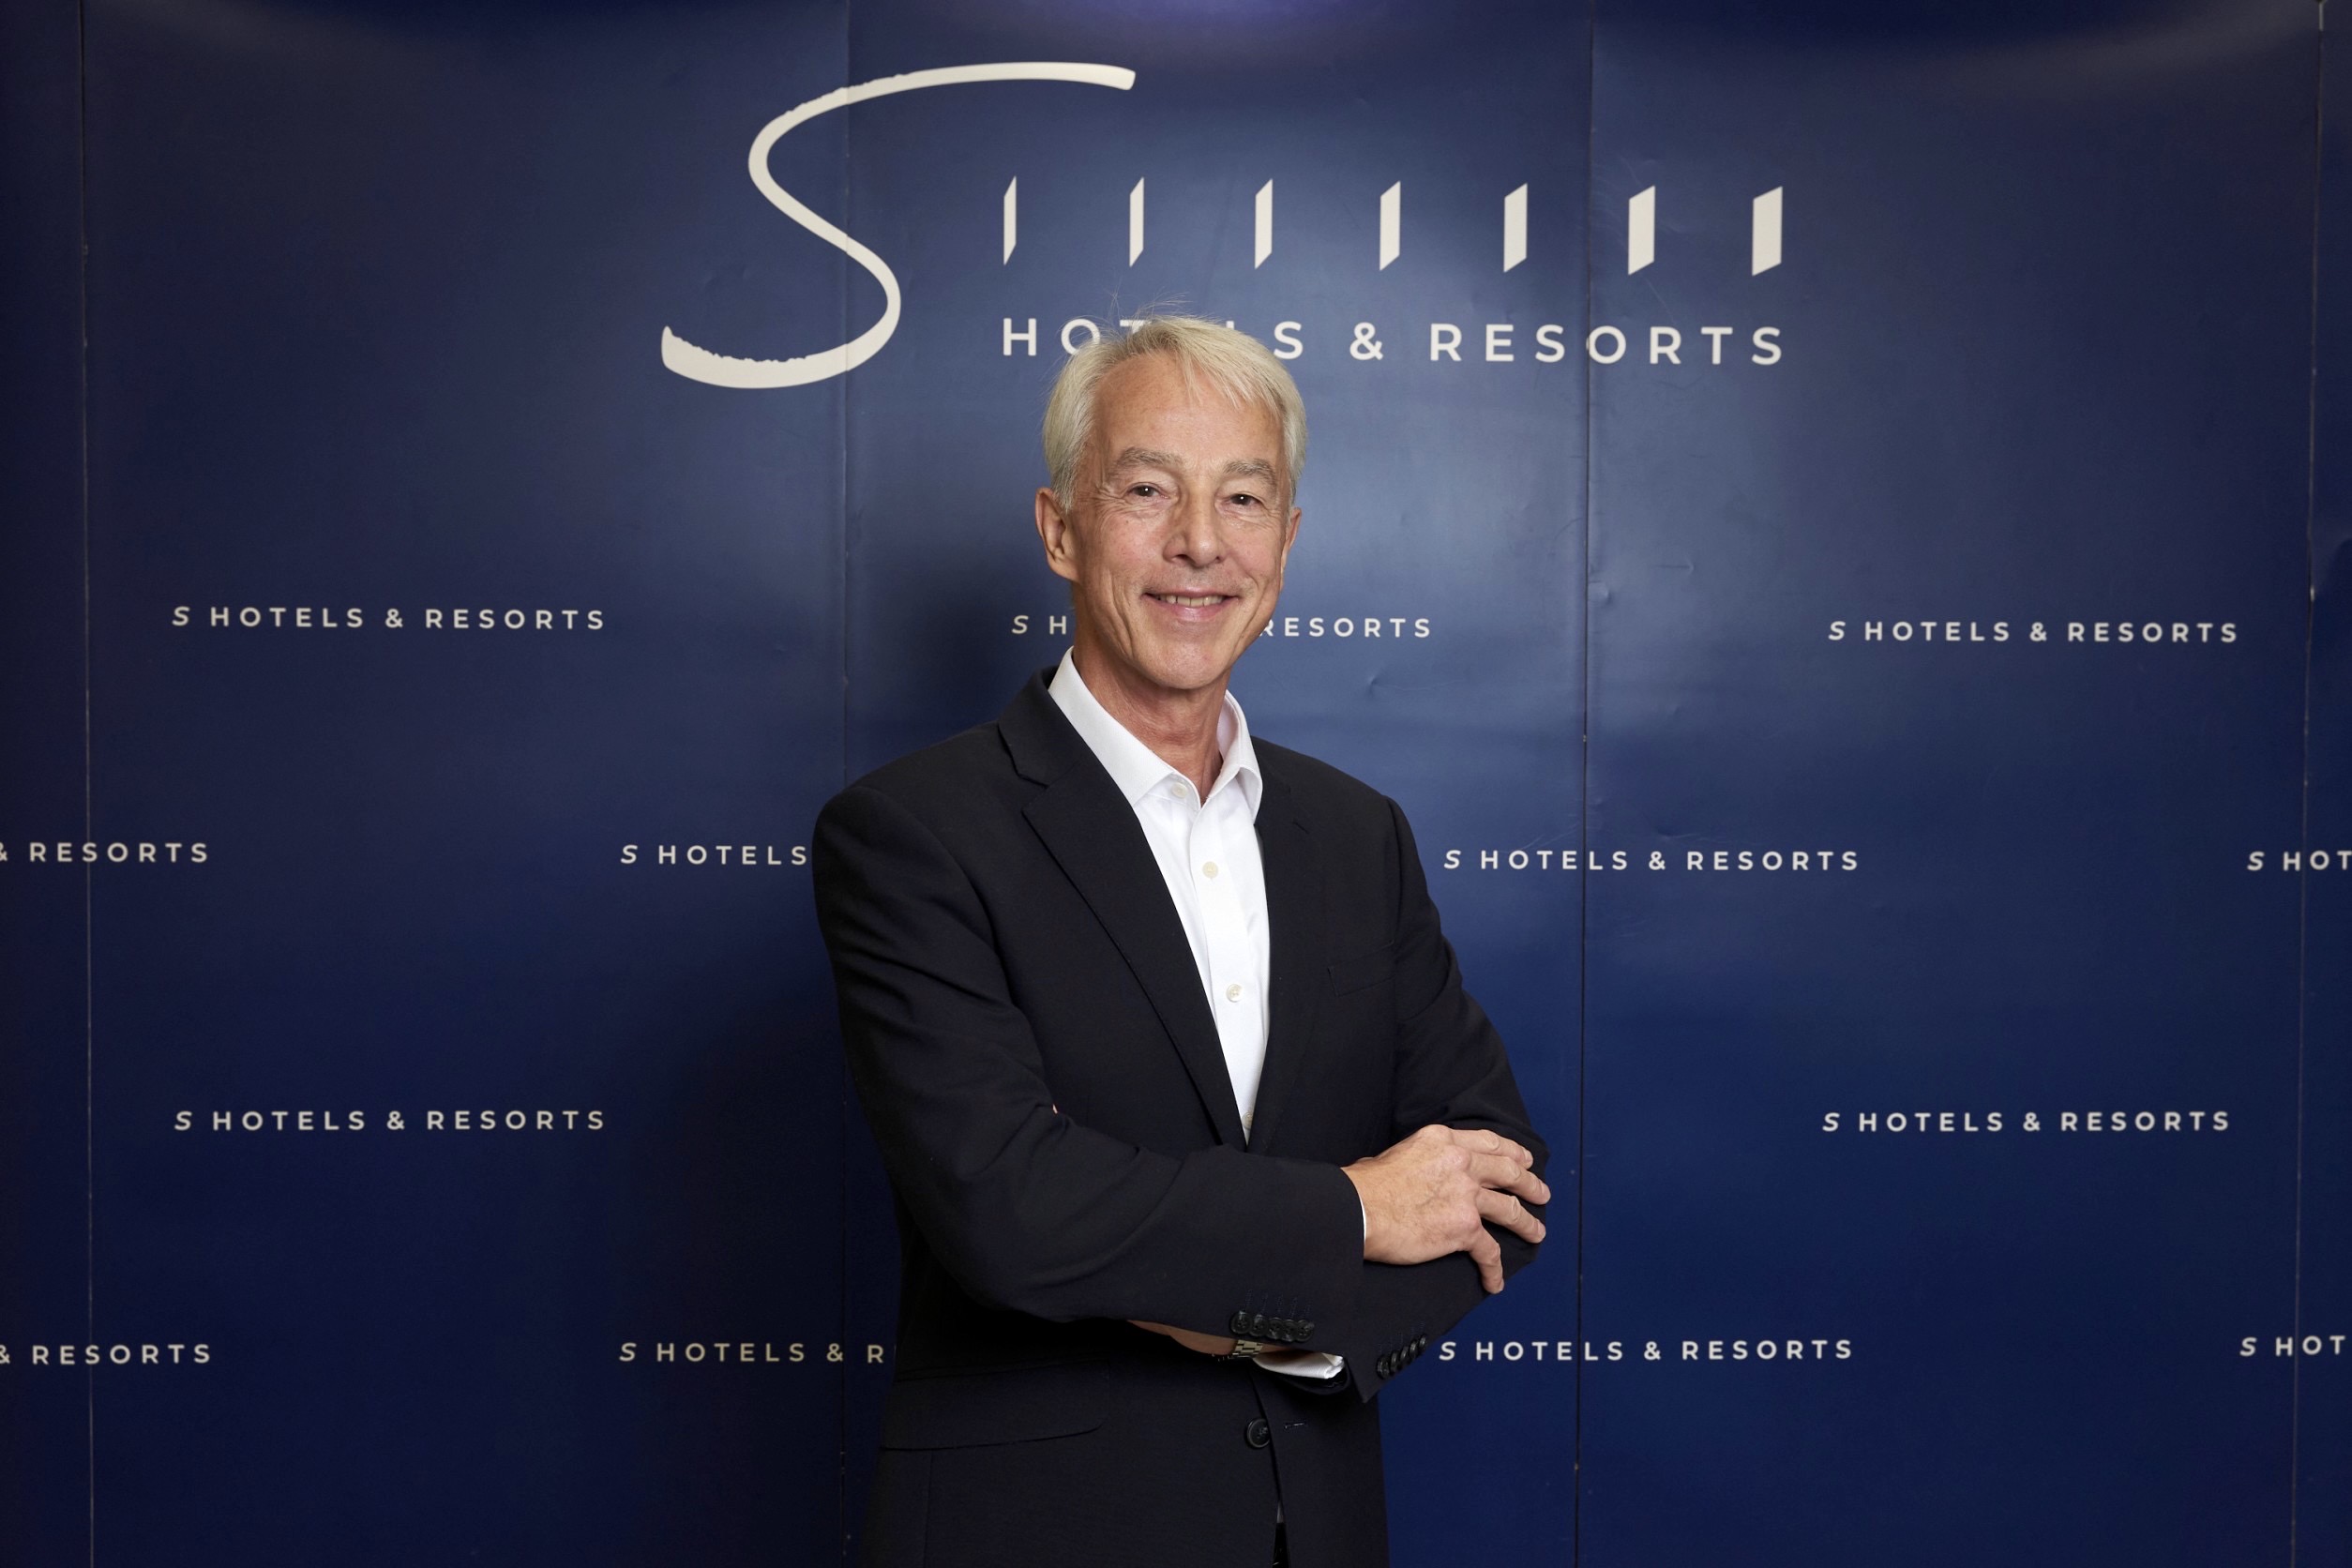 S Hotels & Resorts reinforces focus on profitability with THB 12bn target in total revenue and 3-5% increase in EBITDA margin